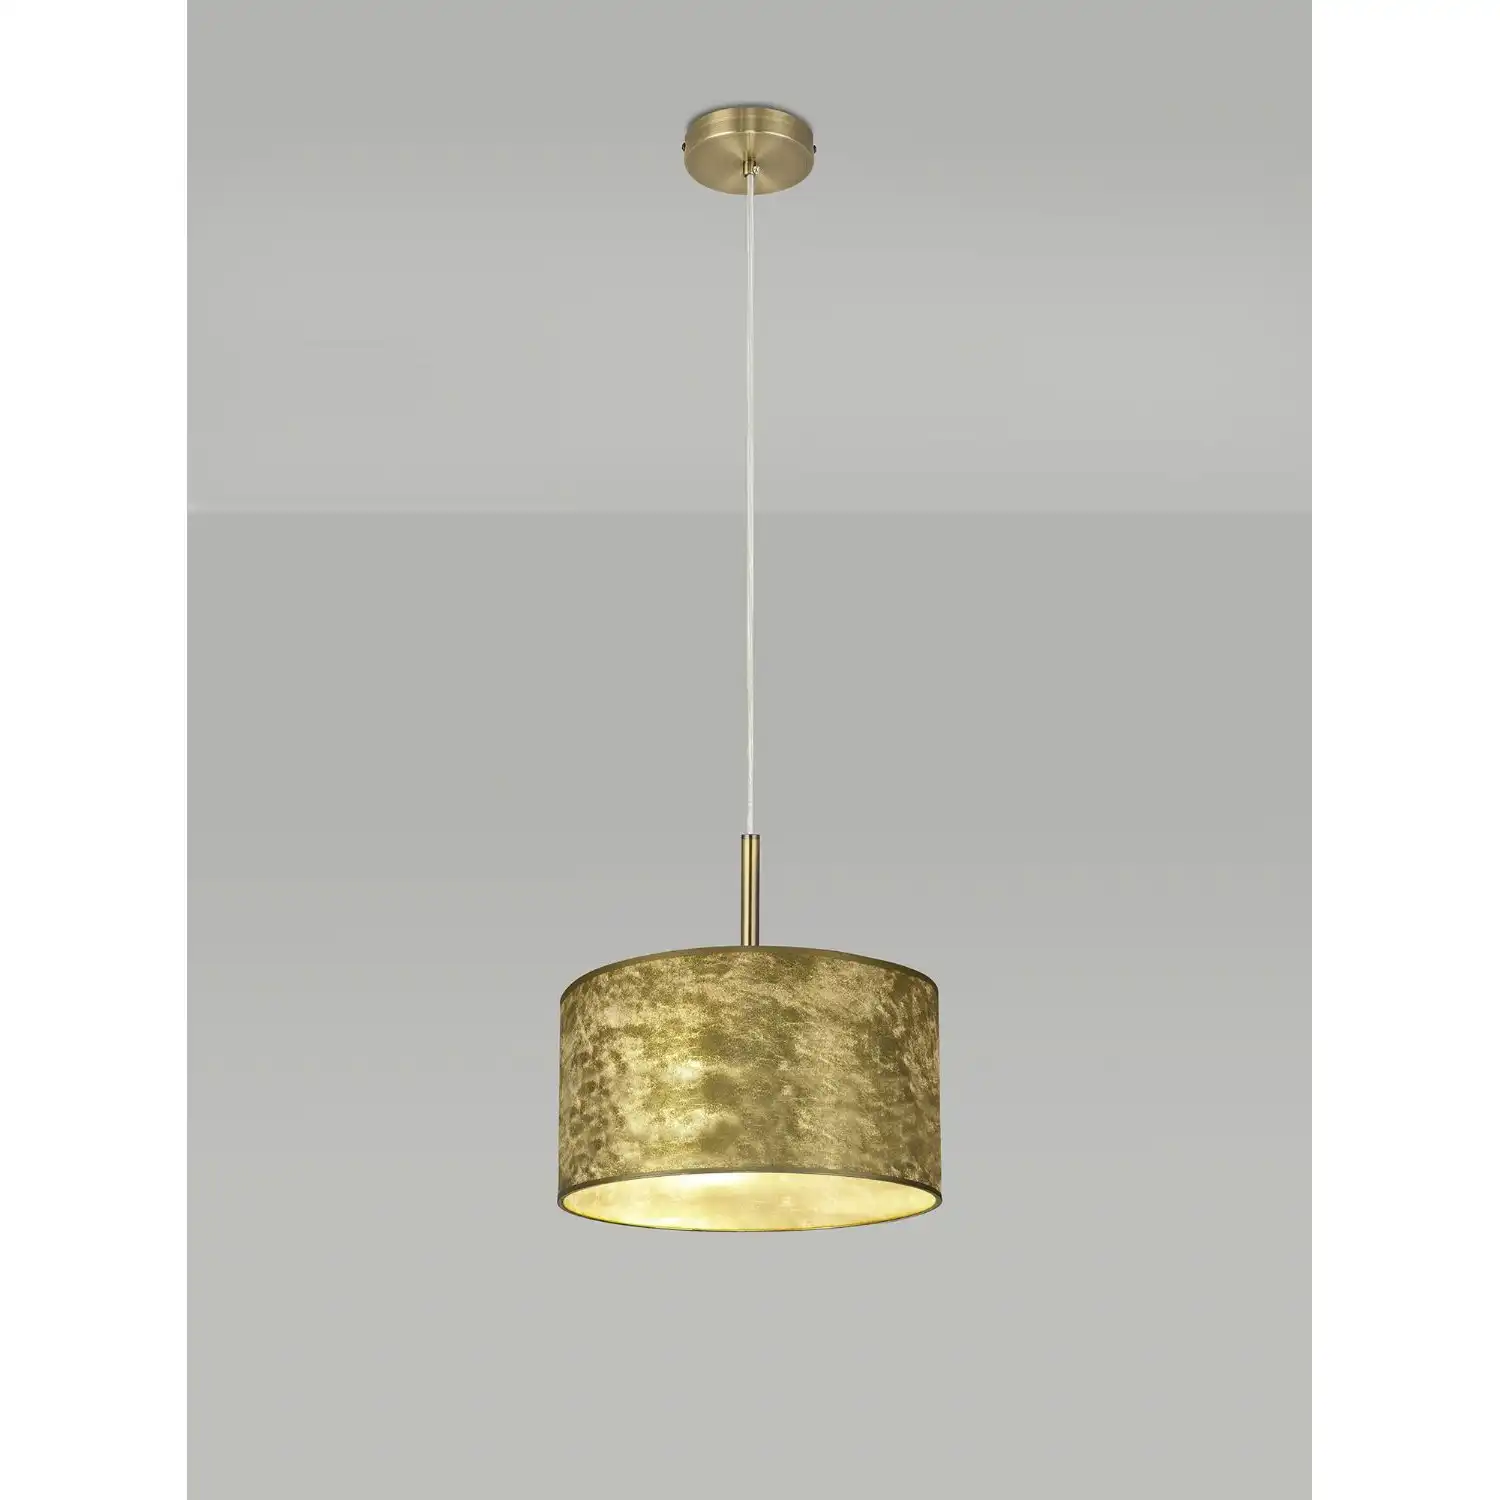 Baymont Antique Brass 1 Light E27 3m Single Pendant With 300mm Gold Leaf Shade